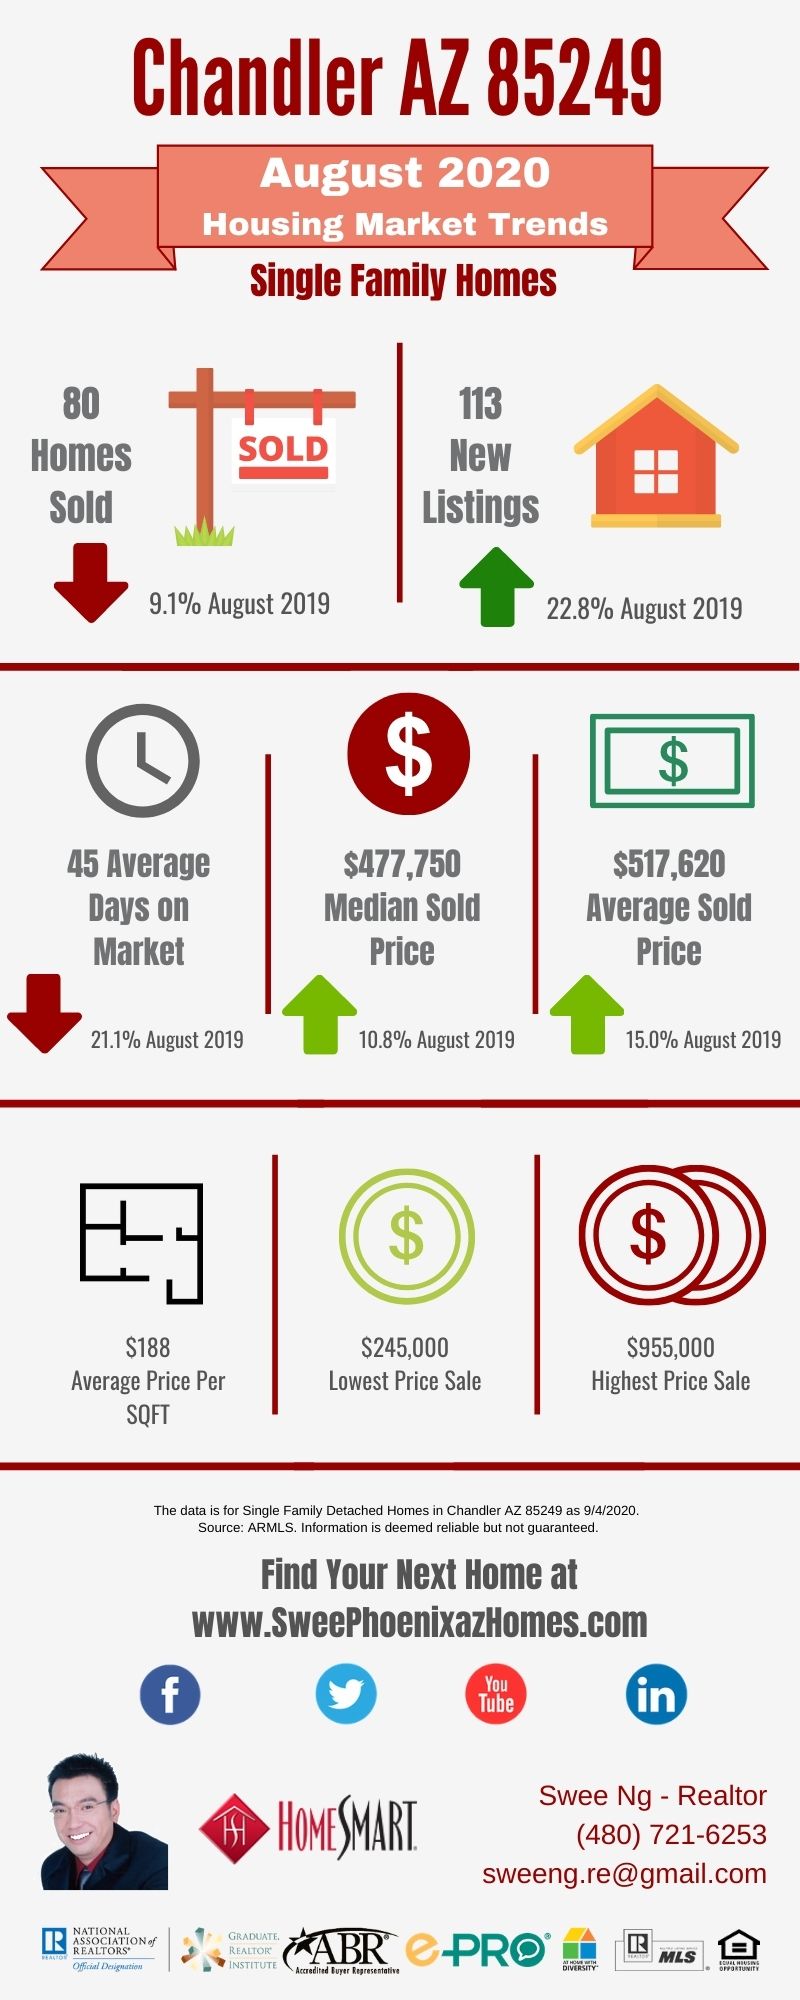 Chandler AZ 85249 Housing Market Trends Report August 2020, House Value, Real Estate and Statistic by Swee Ng